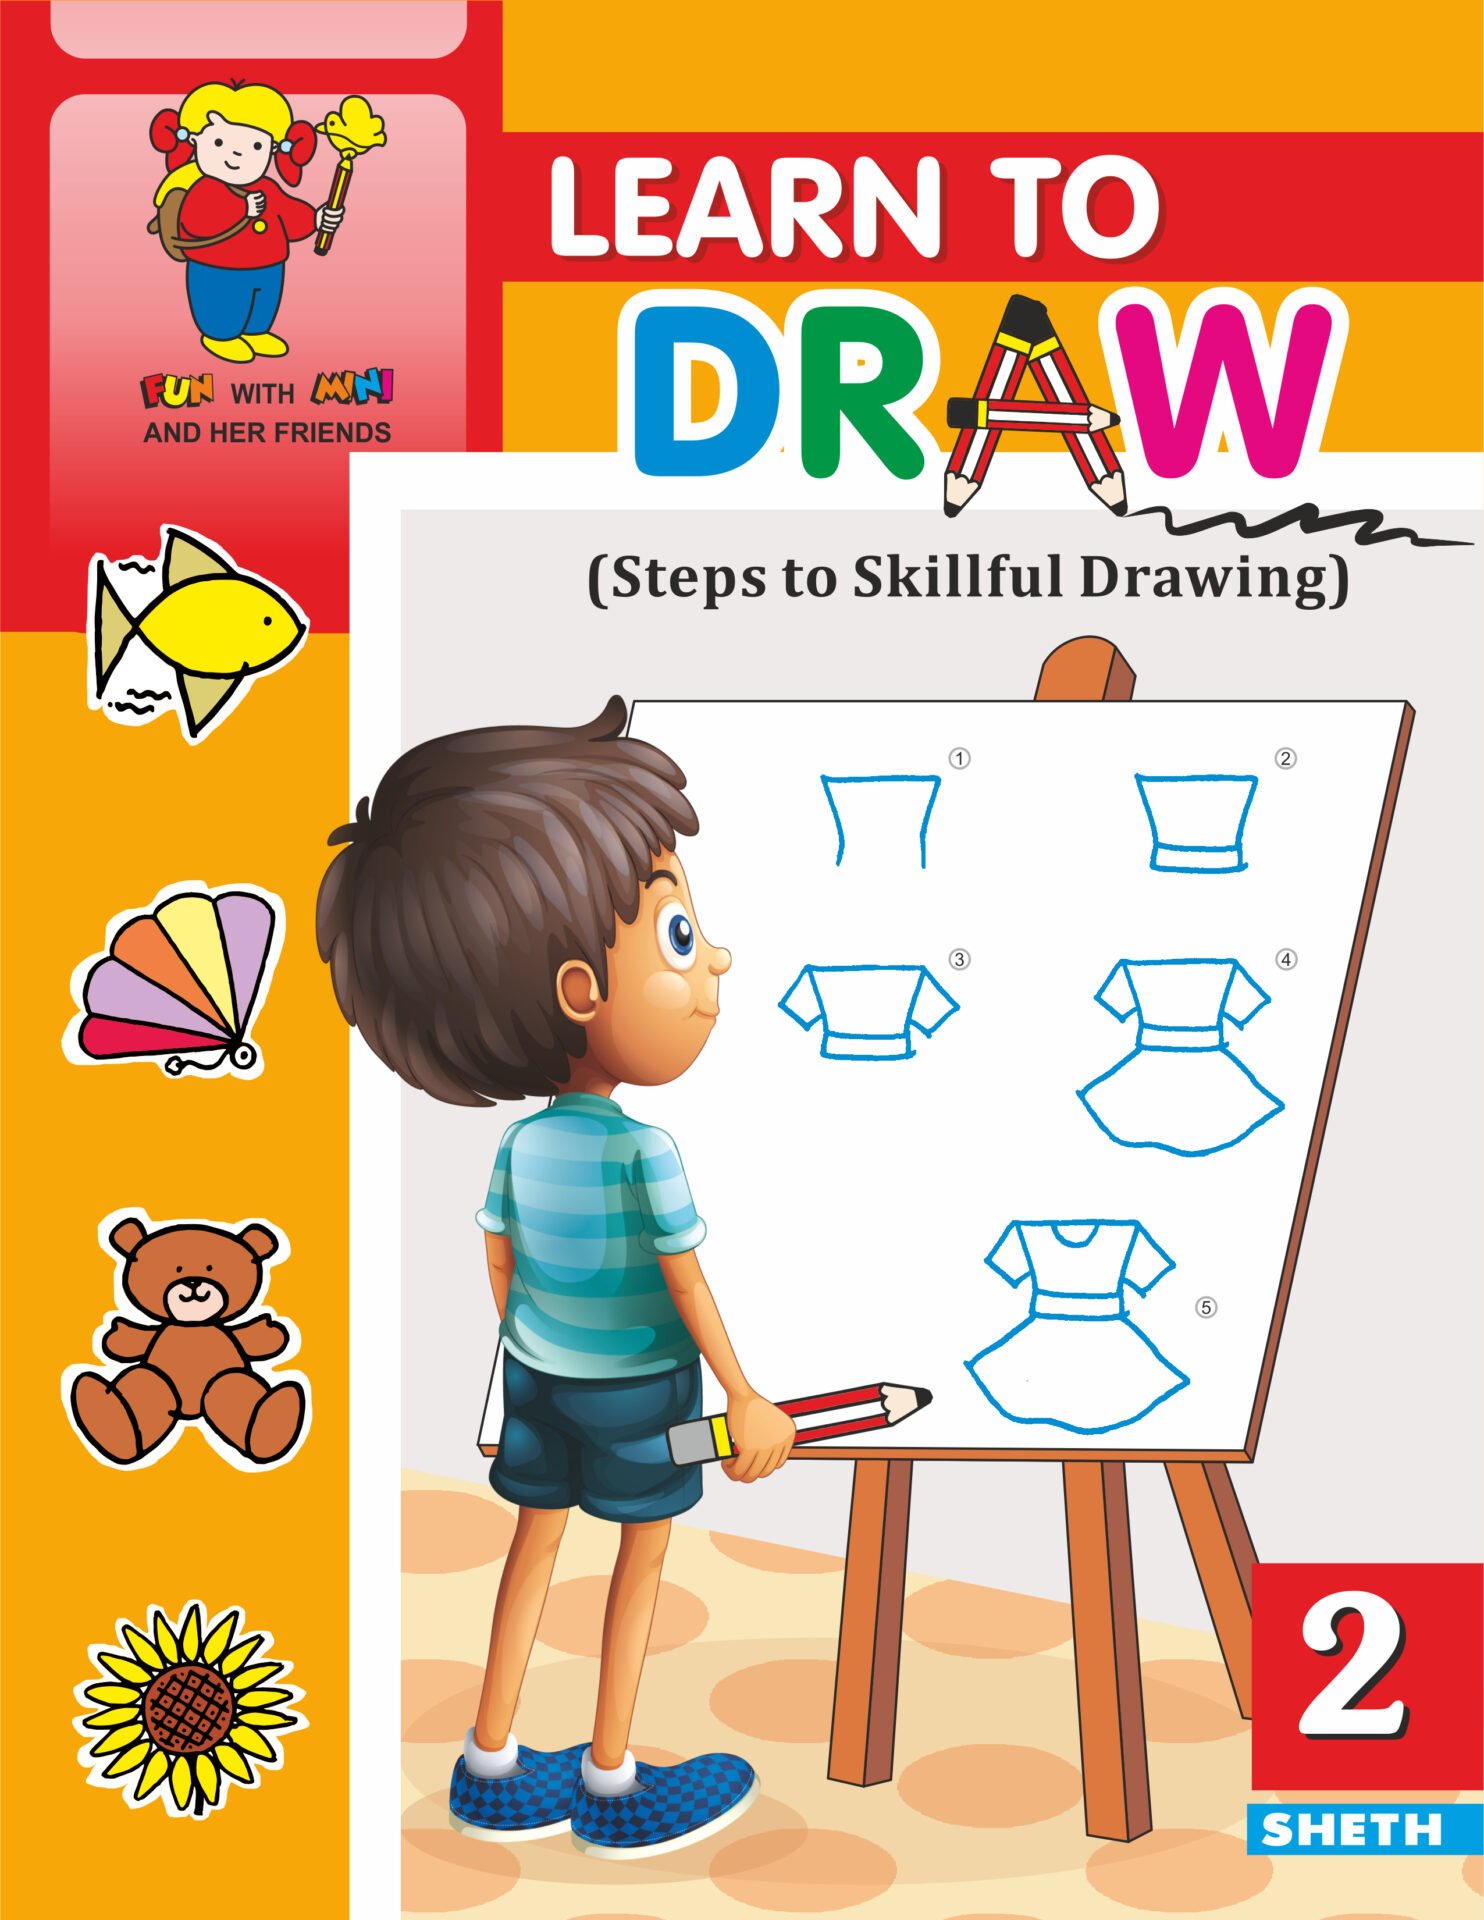 Pin by Patsy Langanki on MY COLORING | Art drawings for kids, Easy drawings,  Hand art kids